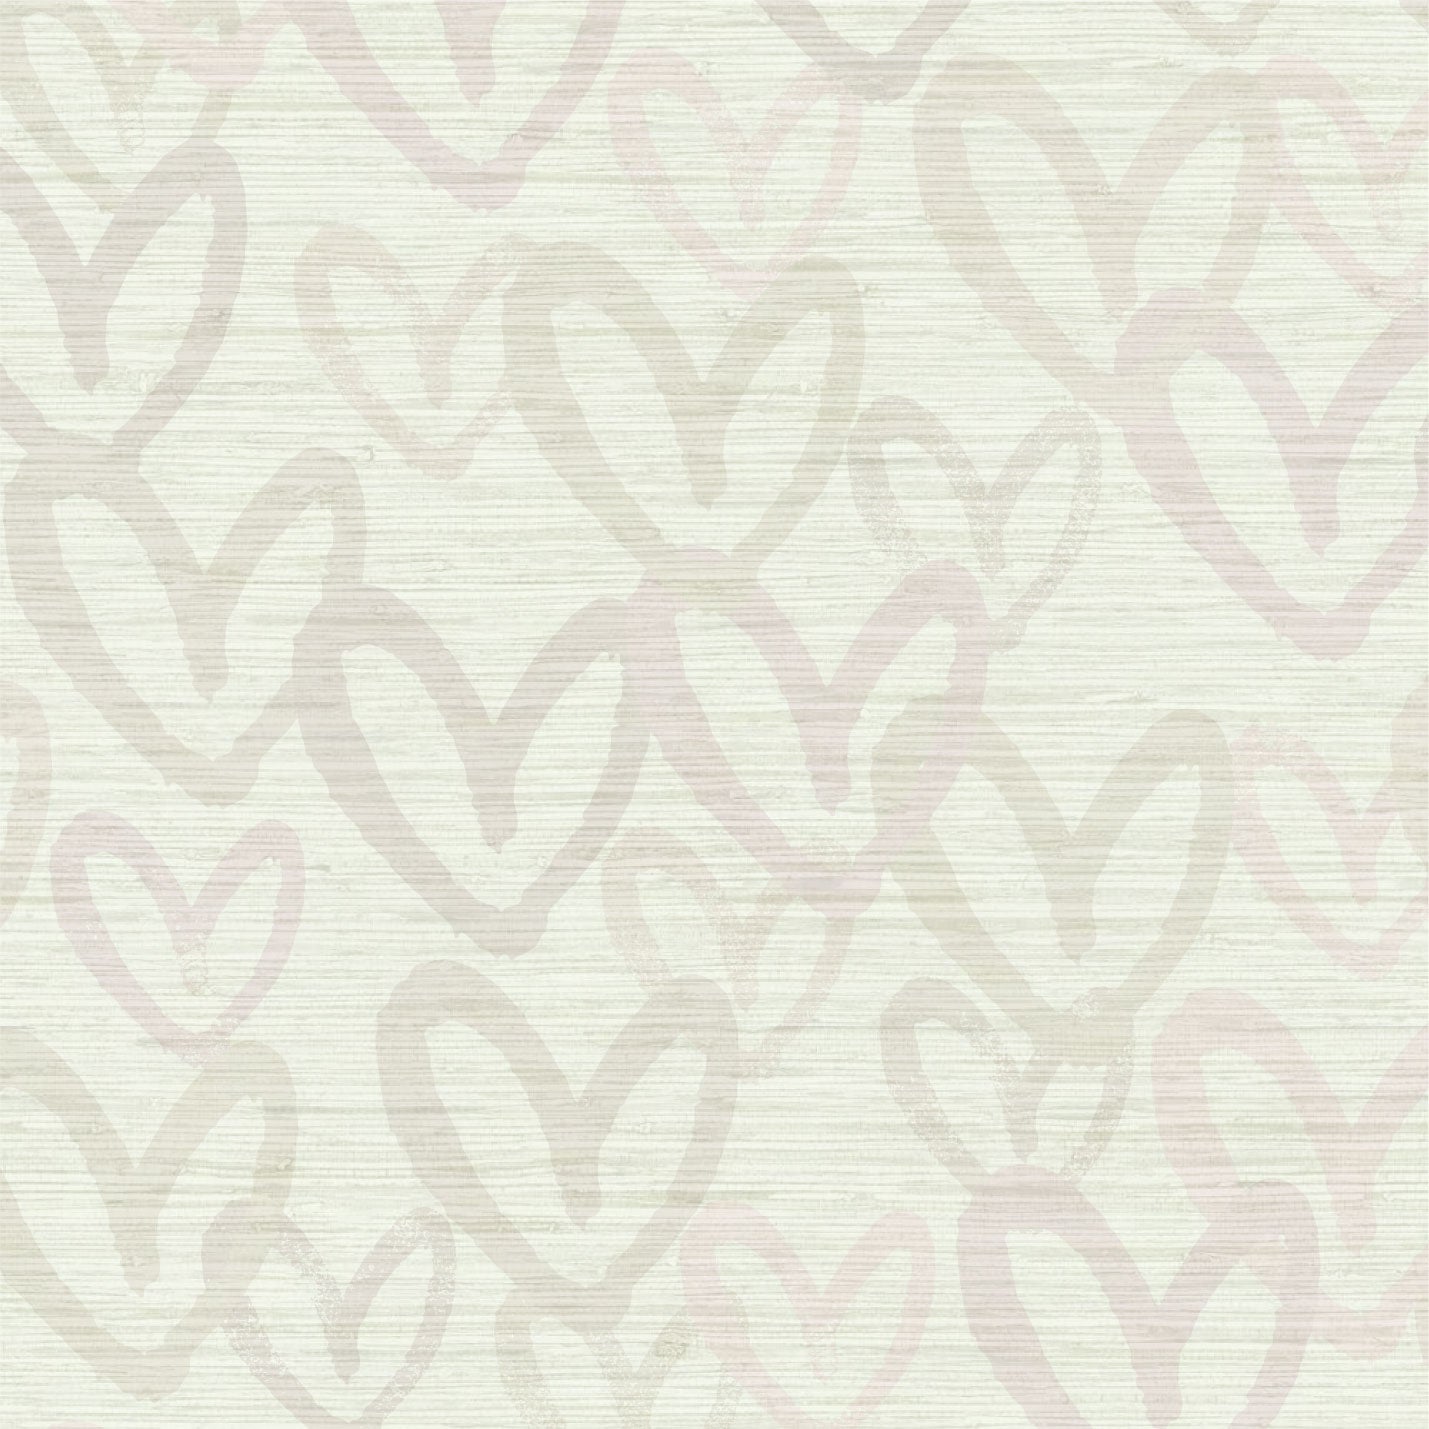 Printed grasscloth wallpaper in allover oversized layered heart print great for kids bedrooms and playroom for a fun and happy wallpaper print design and decor Natural Textured Eco-Friendly Non-toxic High-quality Sustainable Interior Design Bold Custom Tailor-made Retro chic House of Shan Imperfect heart white cream taupe beige sand off-white neutral tonal